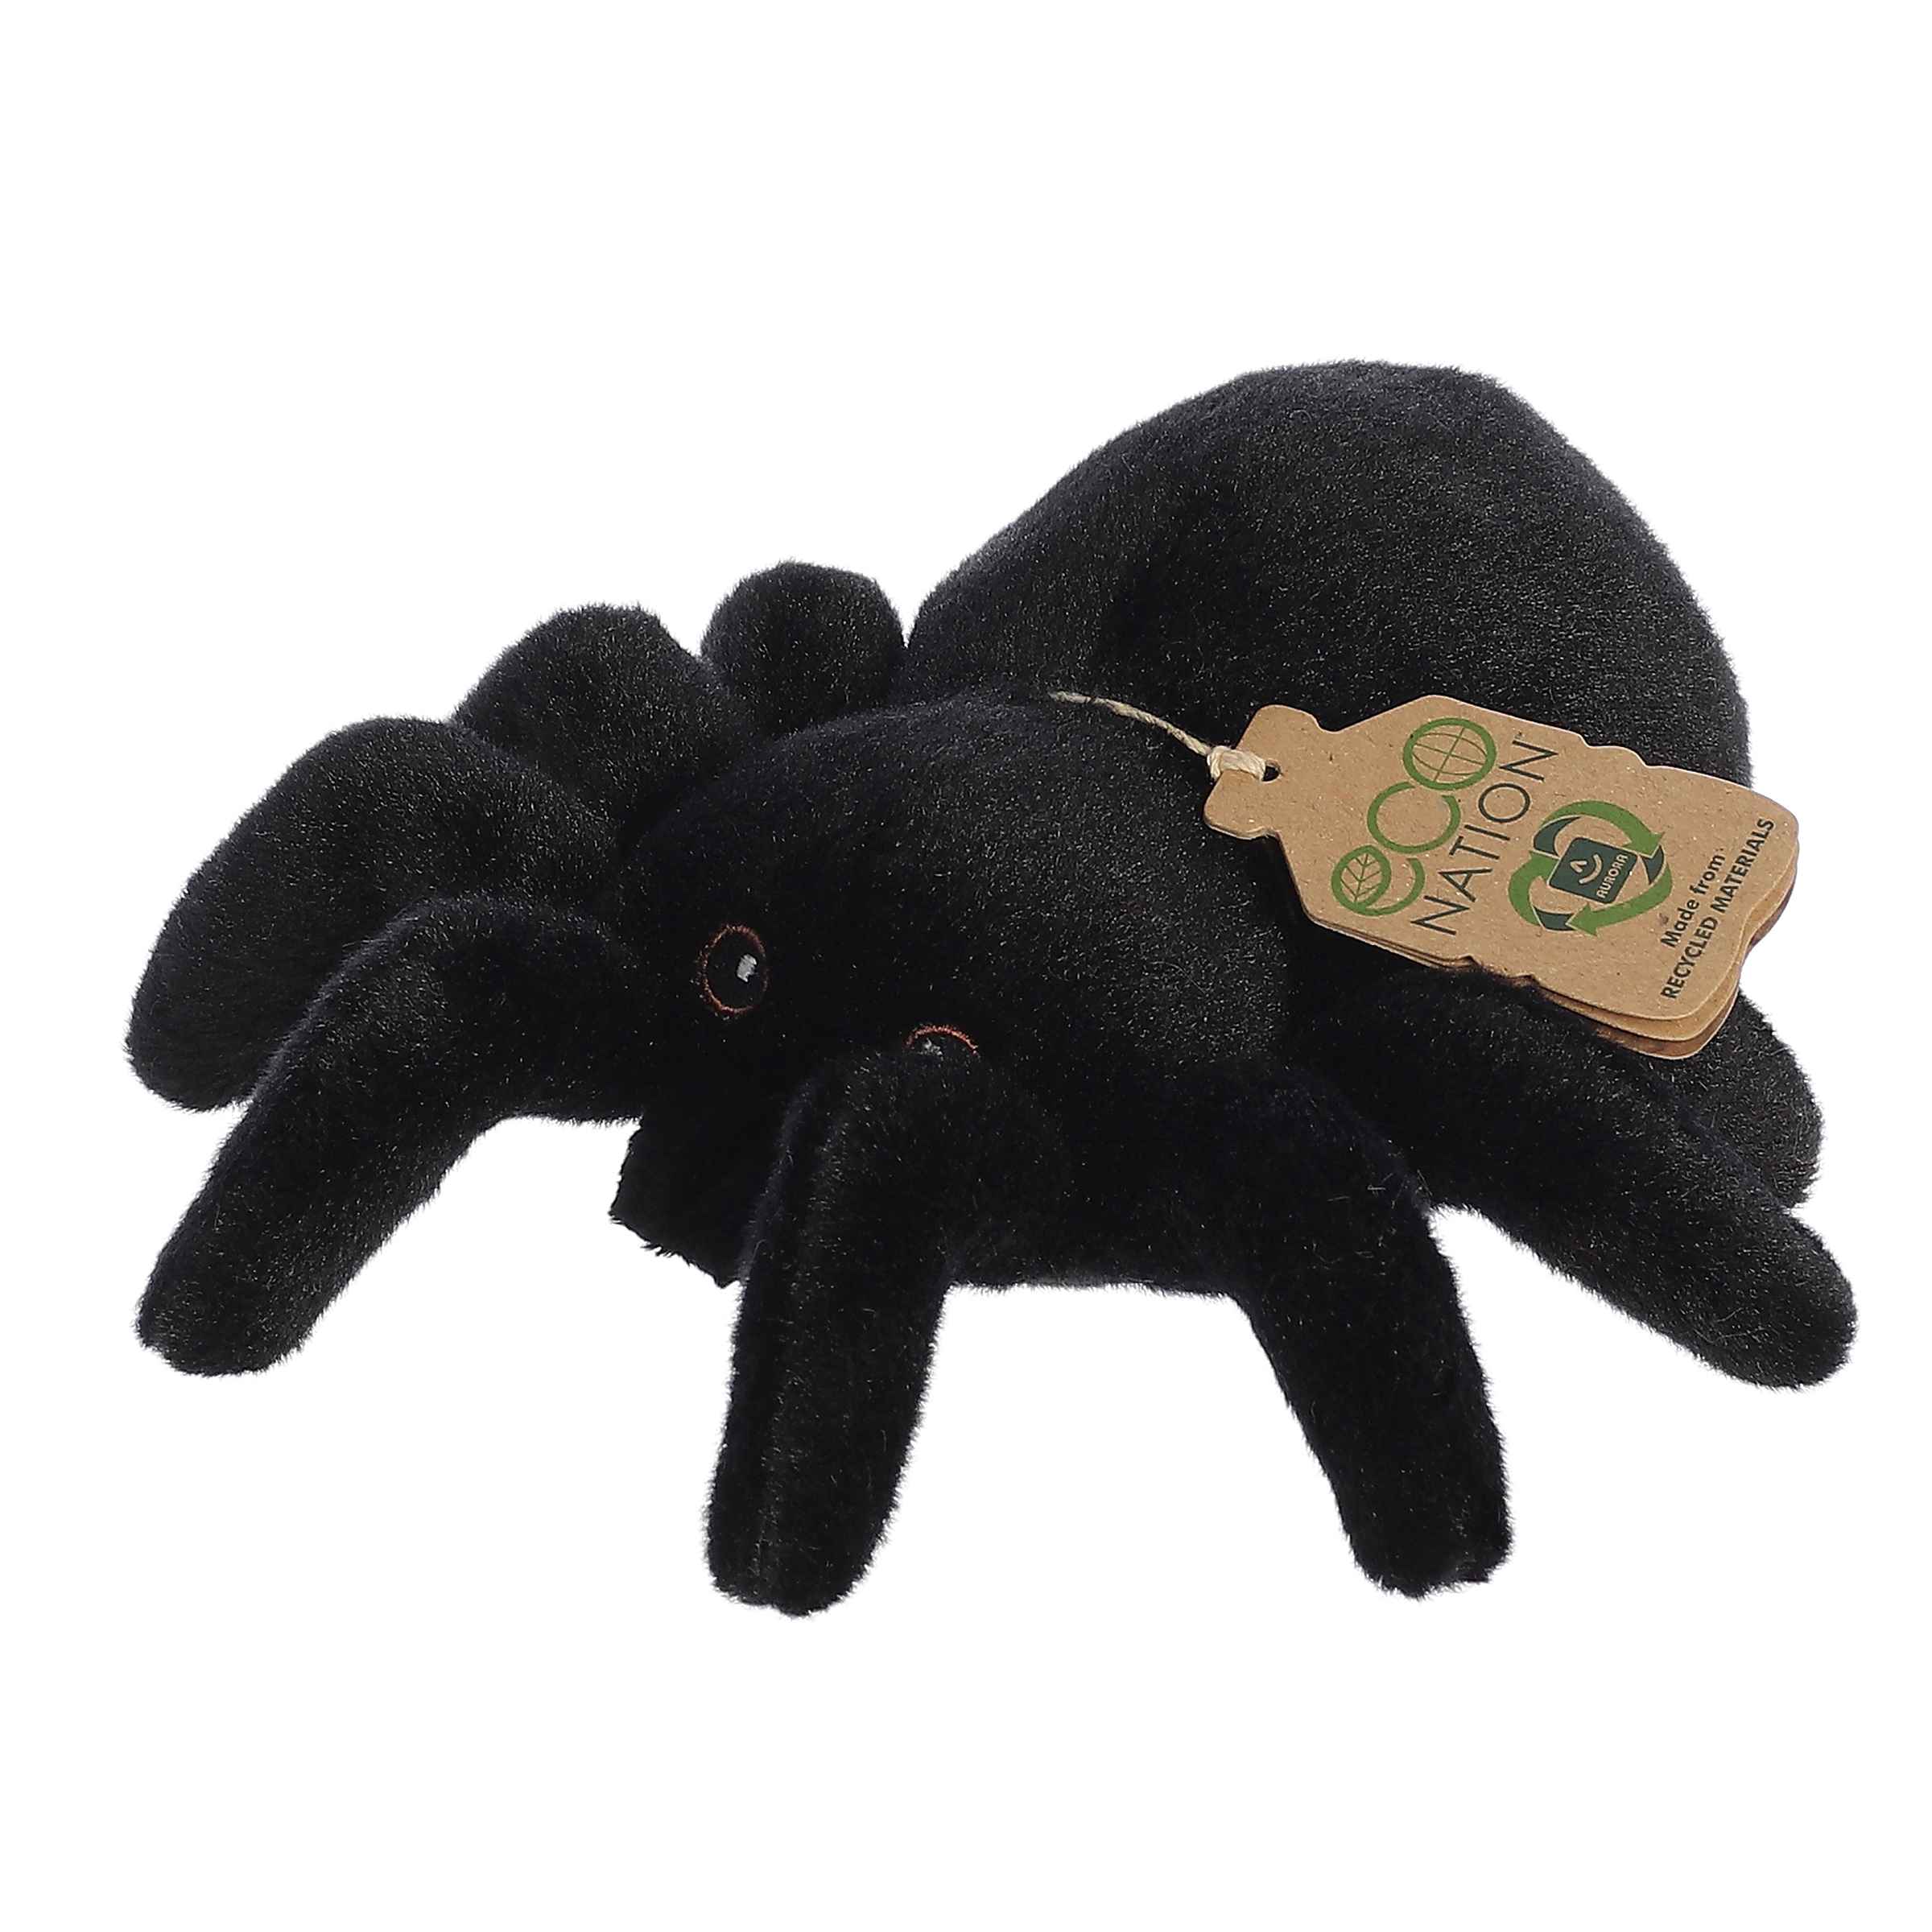 8'' Tarantula plush from Eco Softies, realistic and eco-friendly, made from recycled materials.